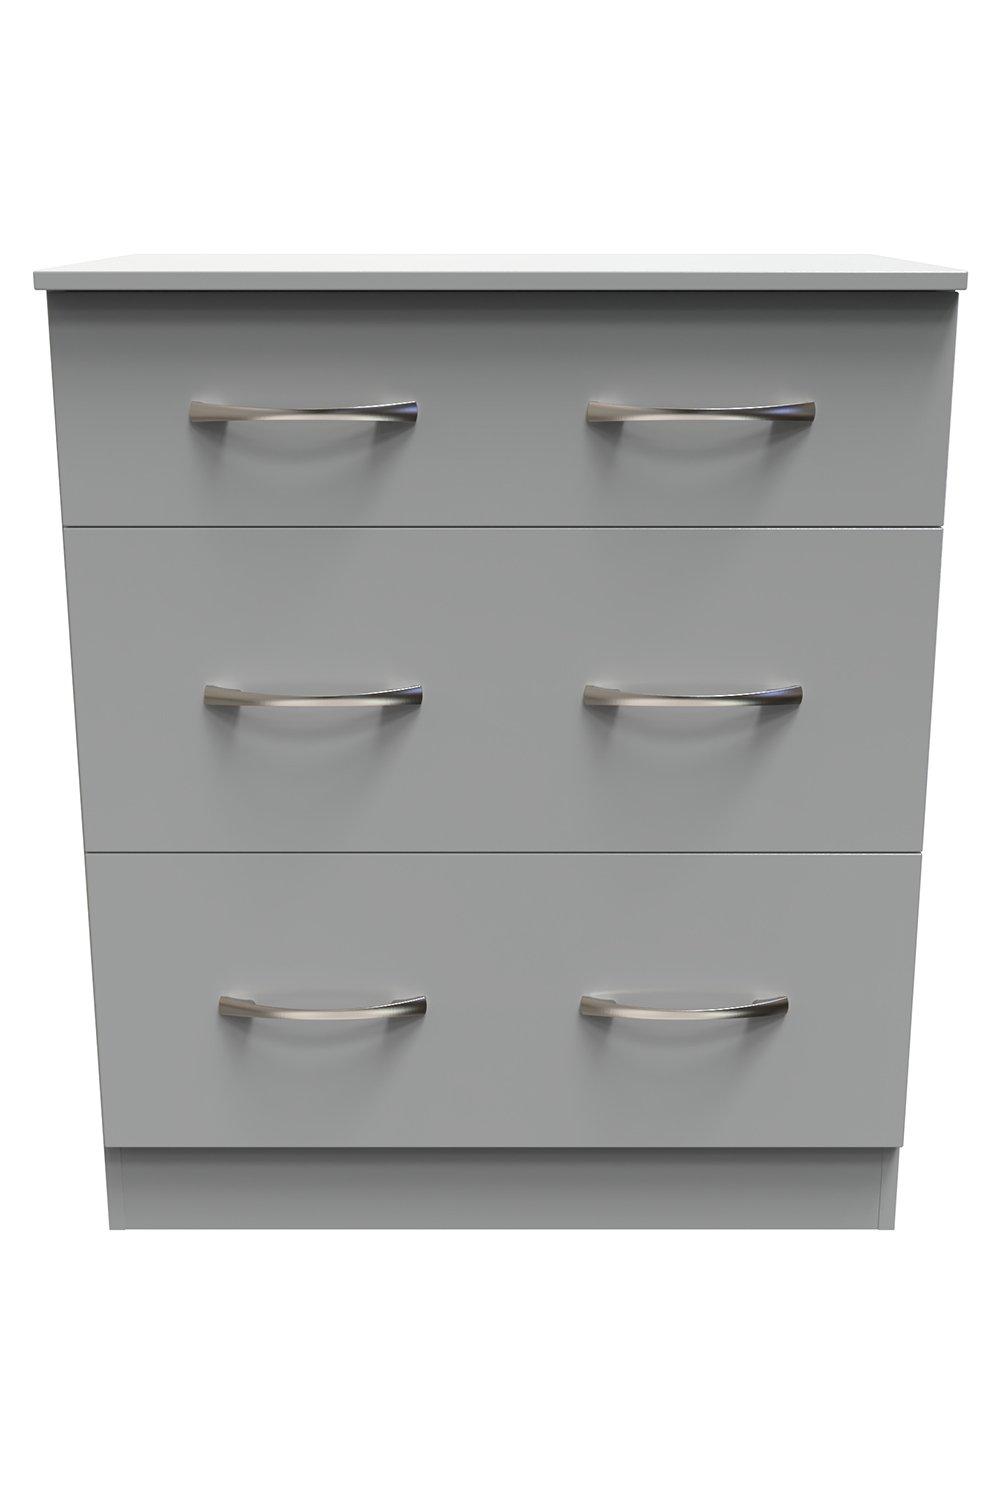 Hampshire 3 Drawer Deep Chest (Ready Assembled)